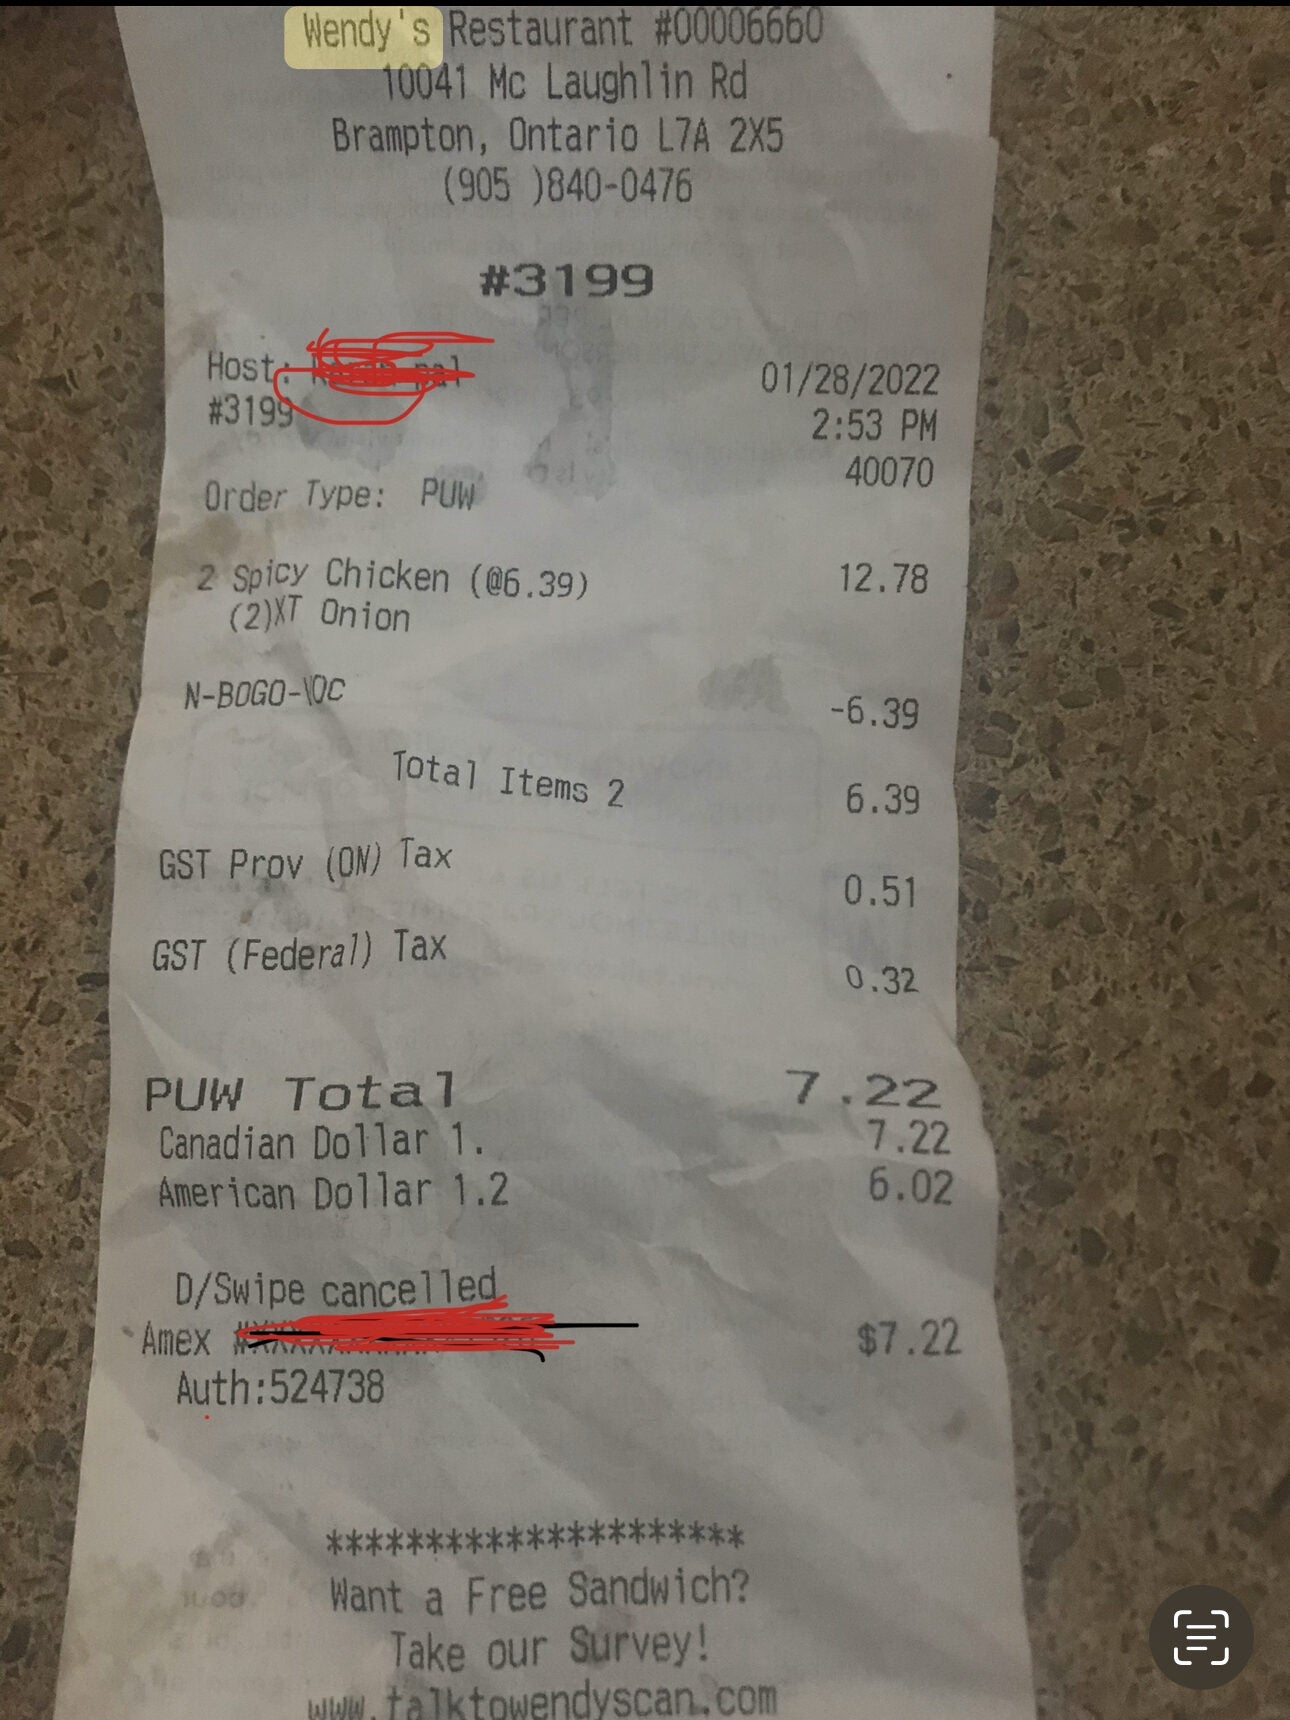 How are y'all gonna call it the 4 for $4 meal when it's $5 : r/wendys